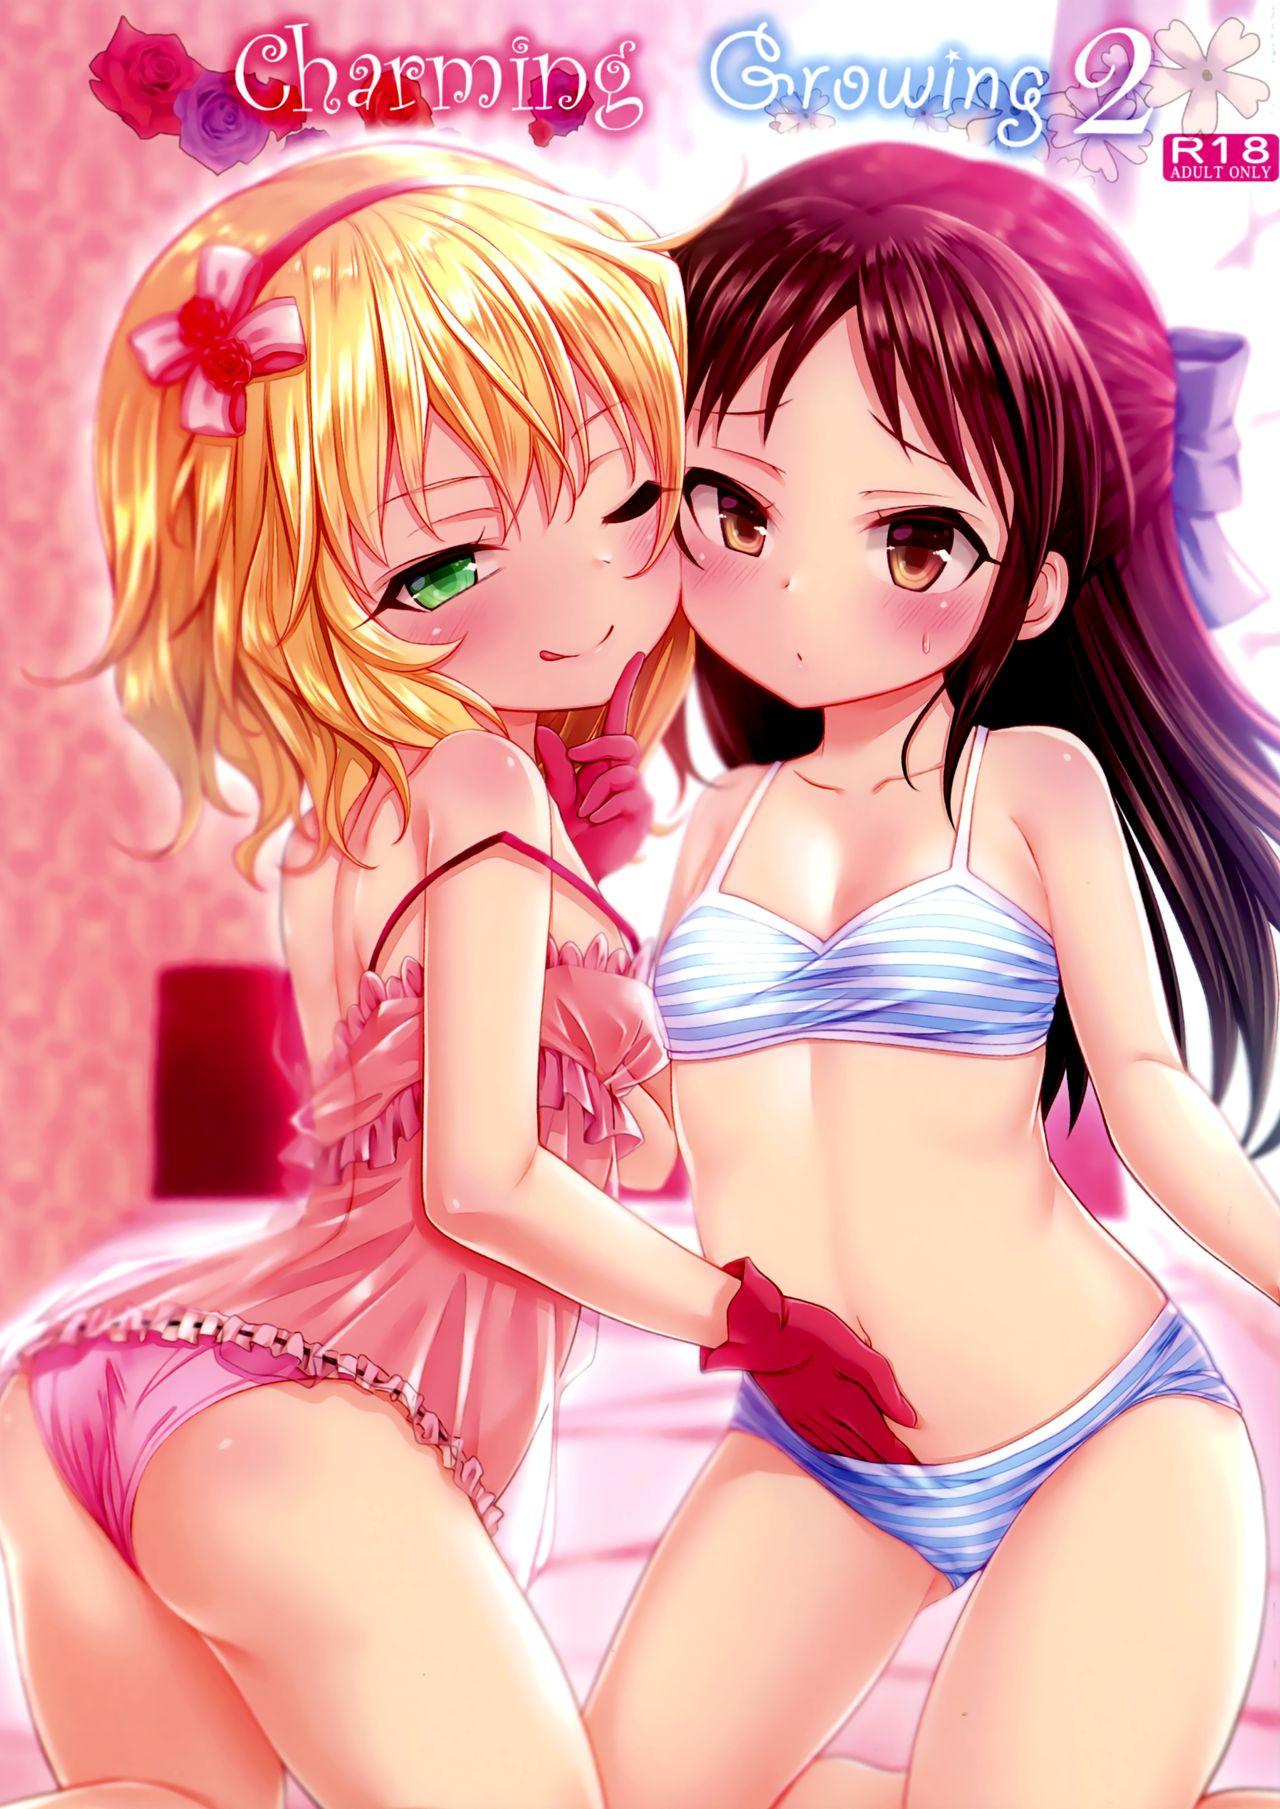 Hot Girl Charming Growing 2 - The idolmaster Exibicionismo - Picture 1